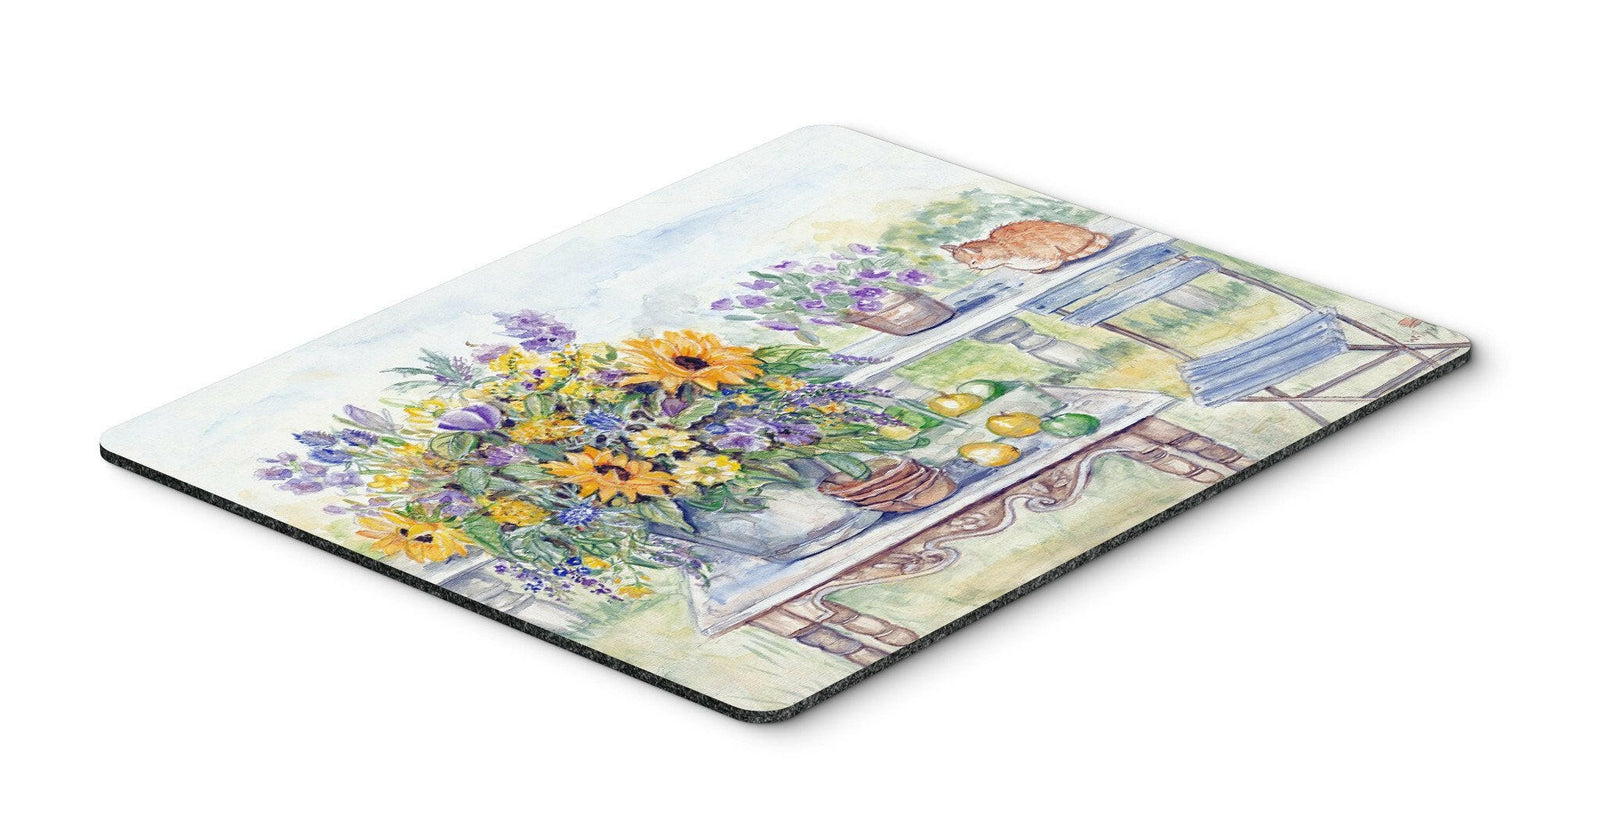 Patio Bouquet of Flowers Mouse Pad, Hot Pad or Trivet APH3566MP by Caroline's Treasures